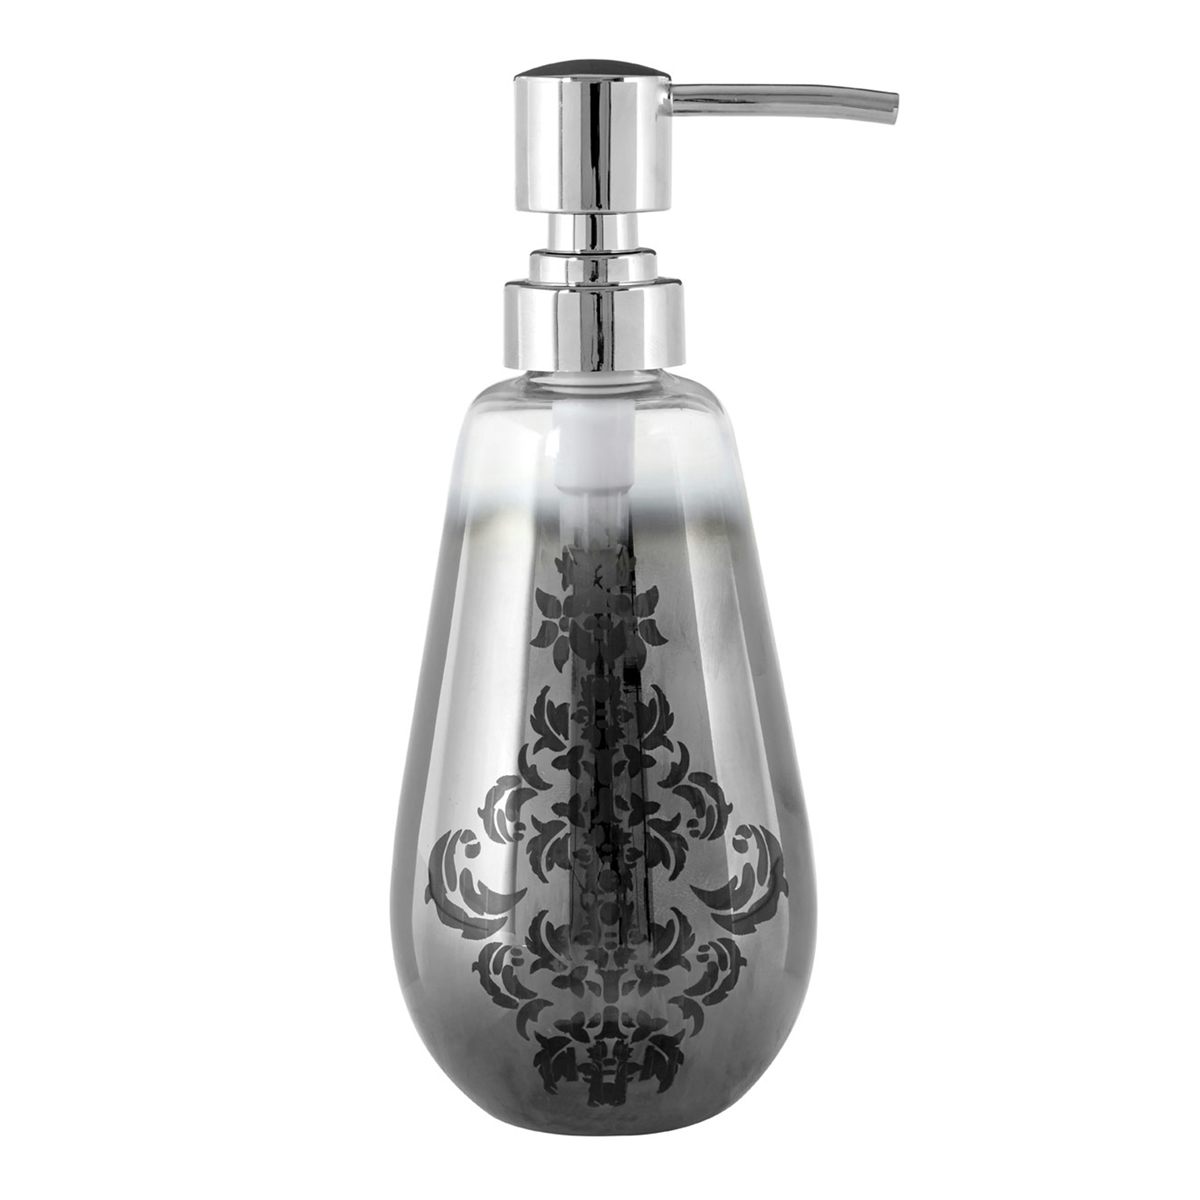 Accents Elissa glass silver lotion dispenser